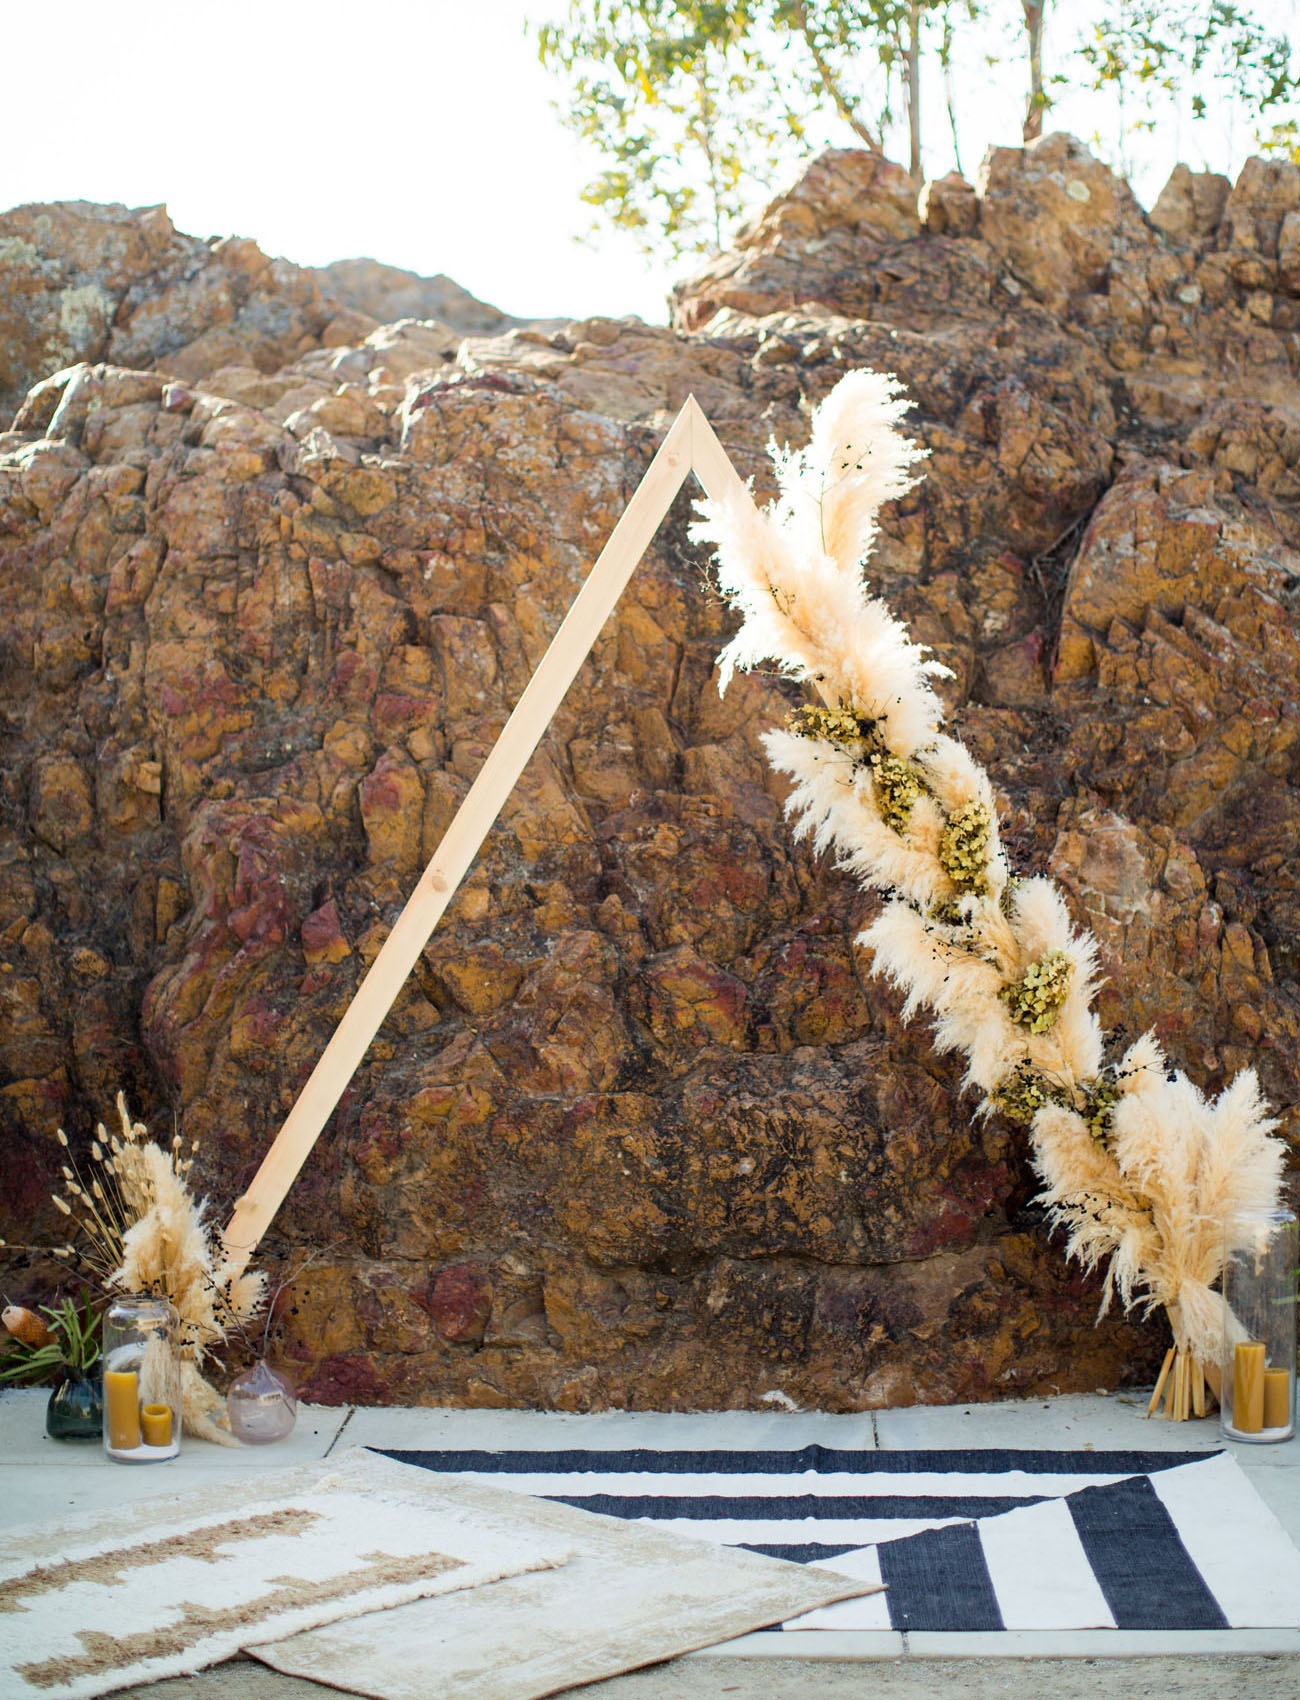 The wedding arch was triangle, with greenery, candles and pampas grass